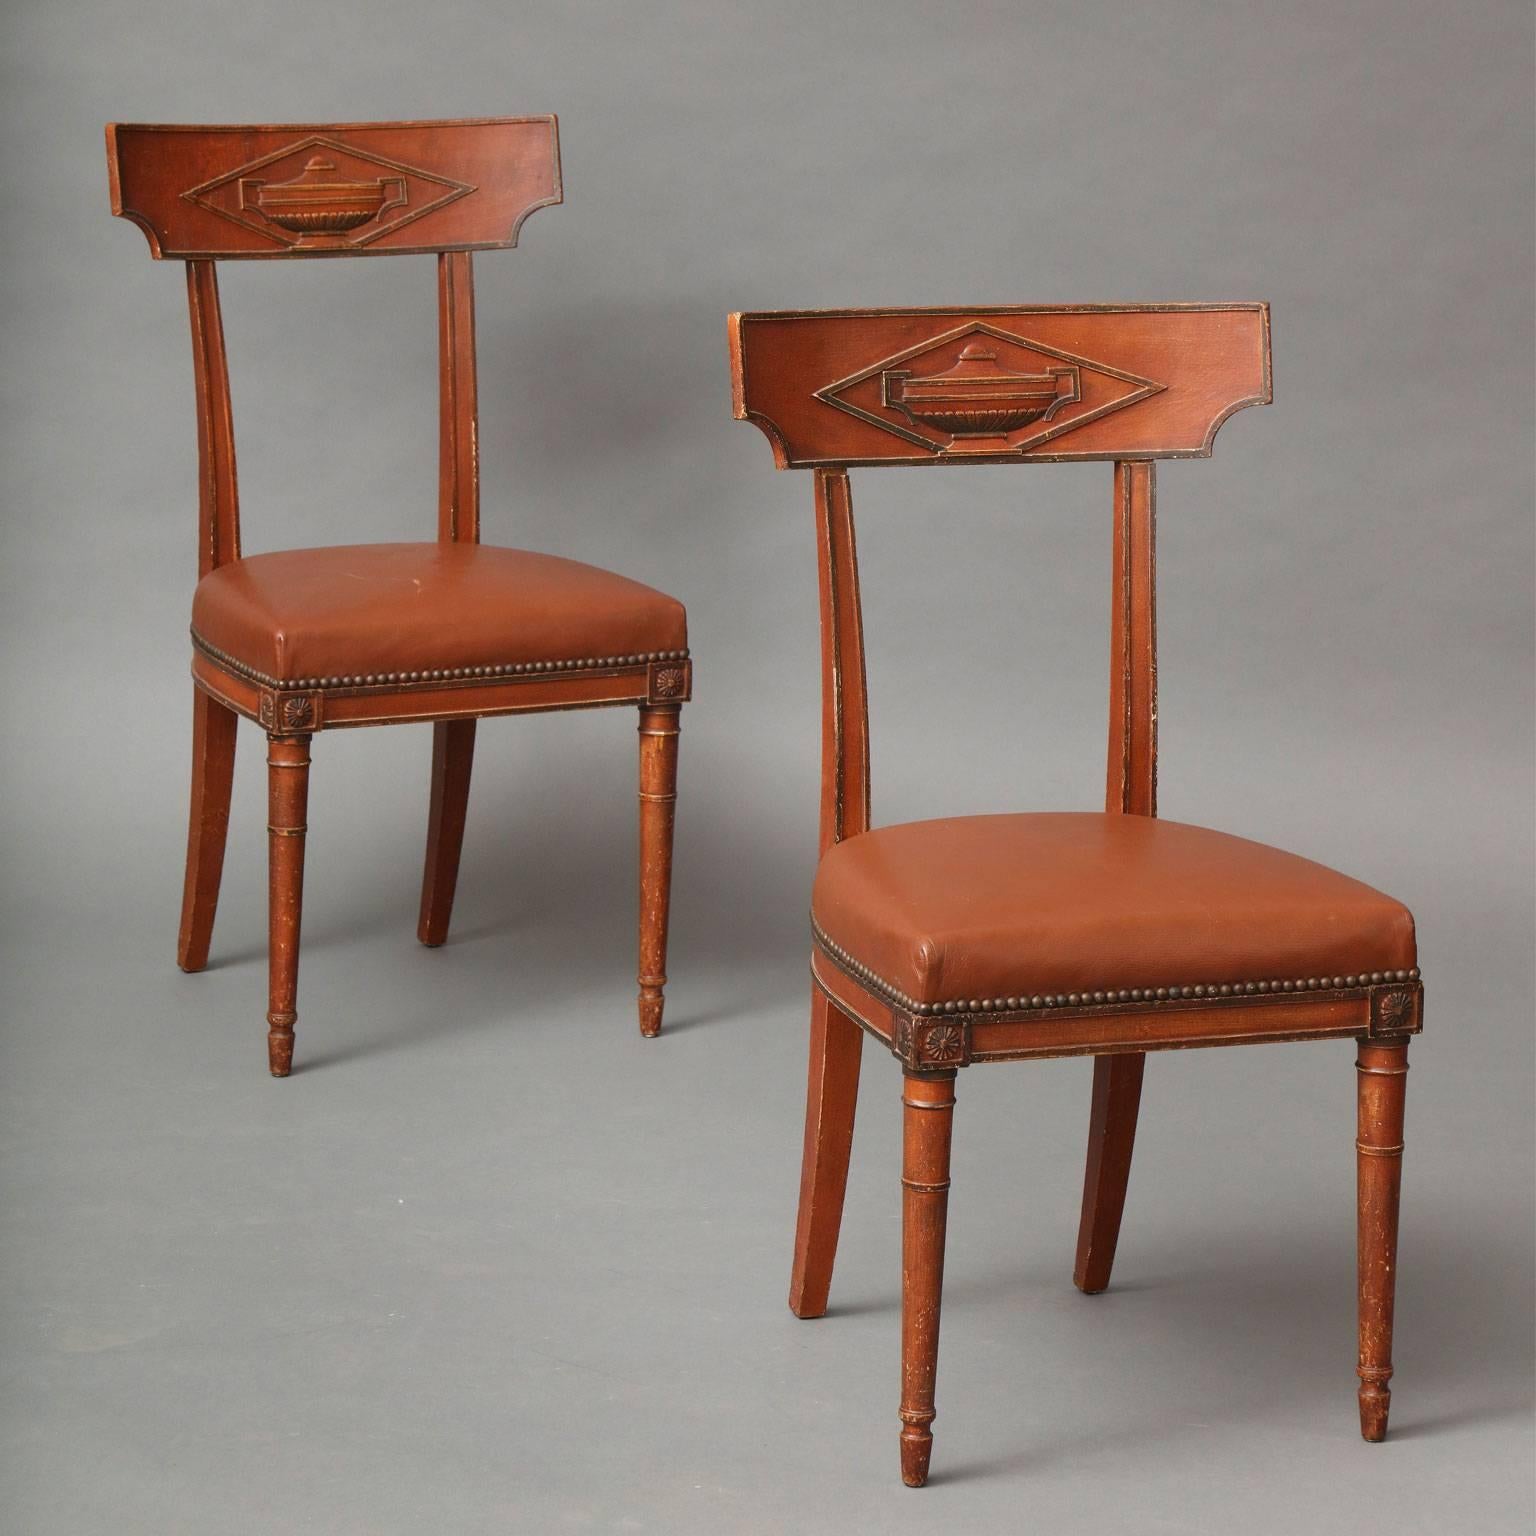 Maison Jansen Pair of Directoire-style side chairs with excellent patina. Classical urn motif carved in back, leather seat with nailhead trim raised on tapering front legs and saber back legs. Painted wood finish in a deep terracotta red with